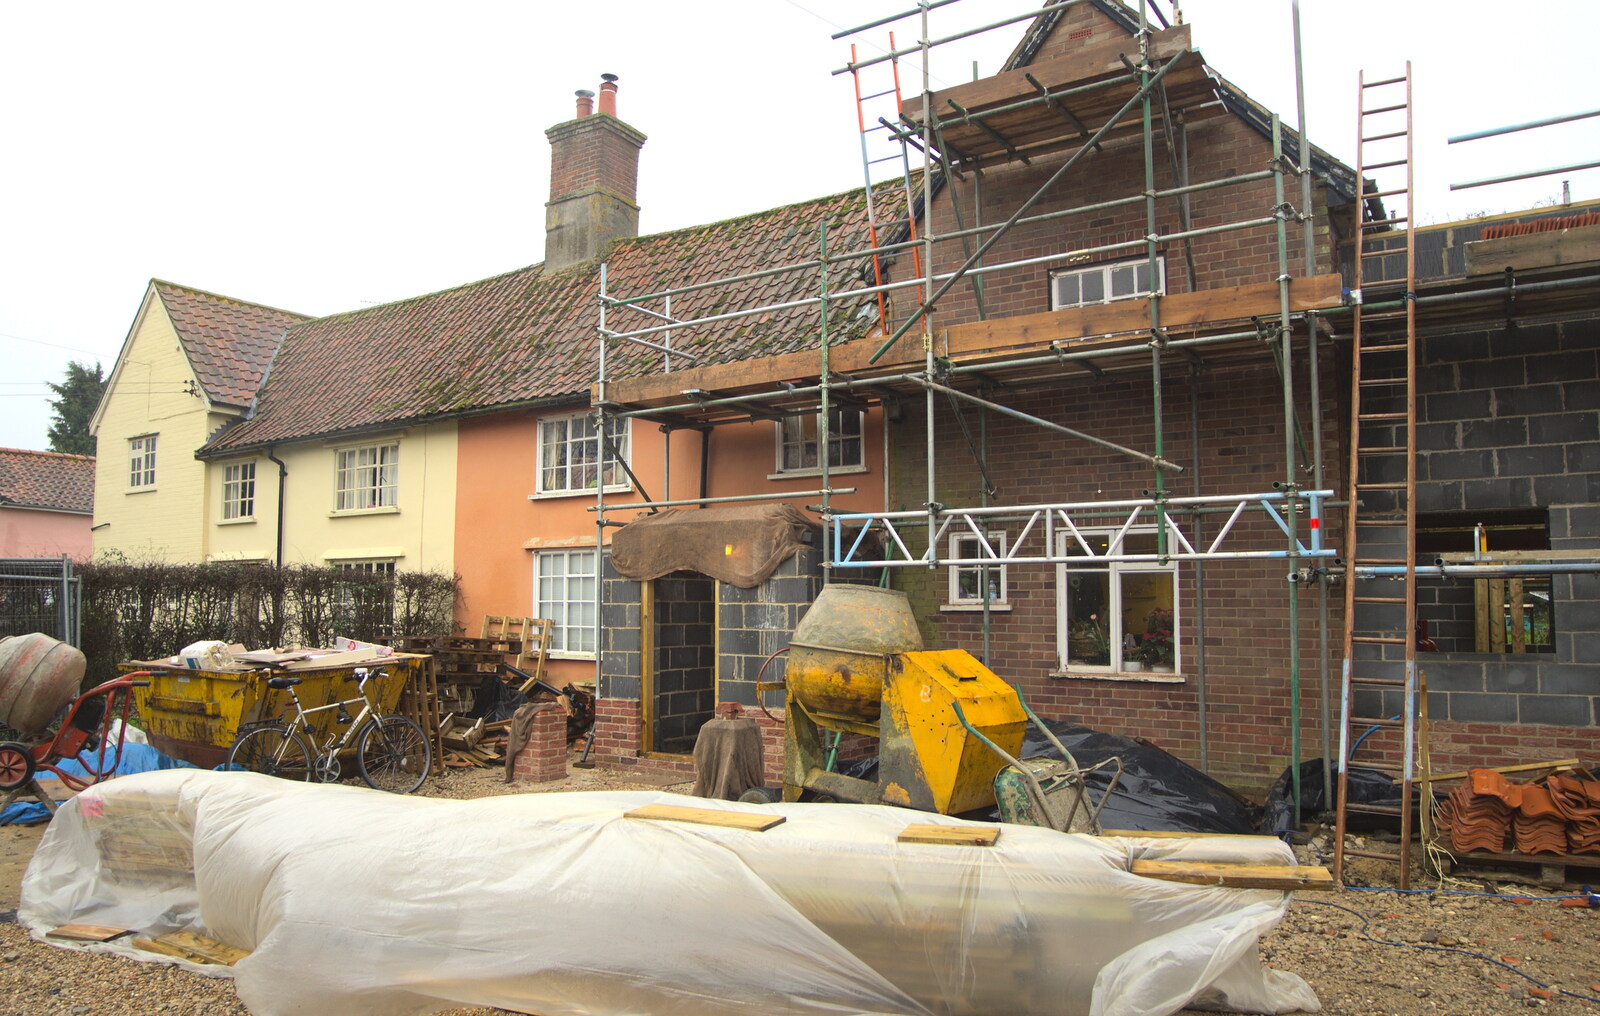 There's scaffolding all over the house from A Night at the Bank, and a Building Update, Brome and Eye, Suffolk - 7th February 2014